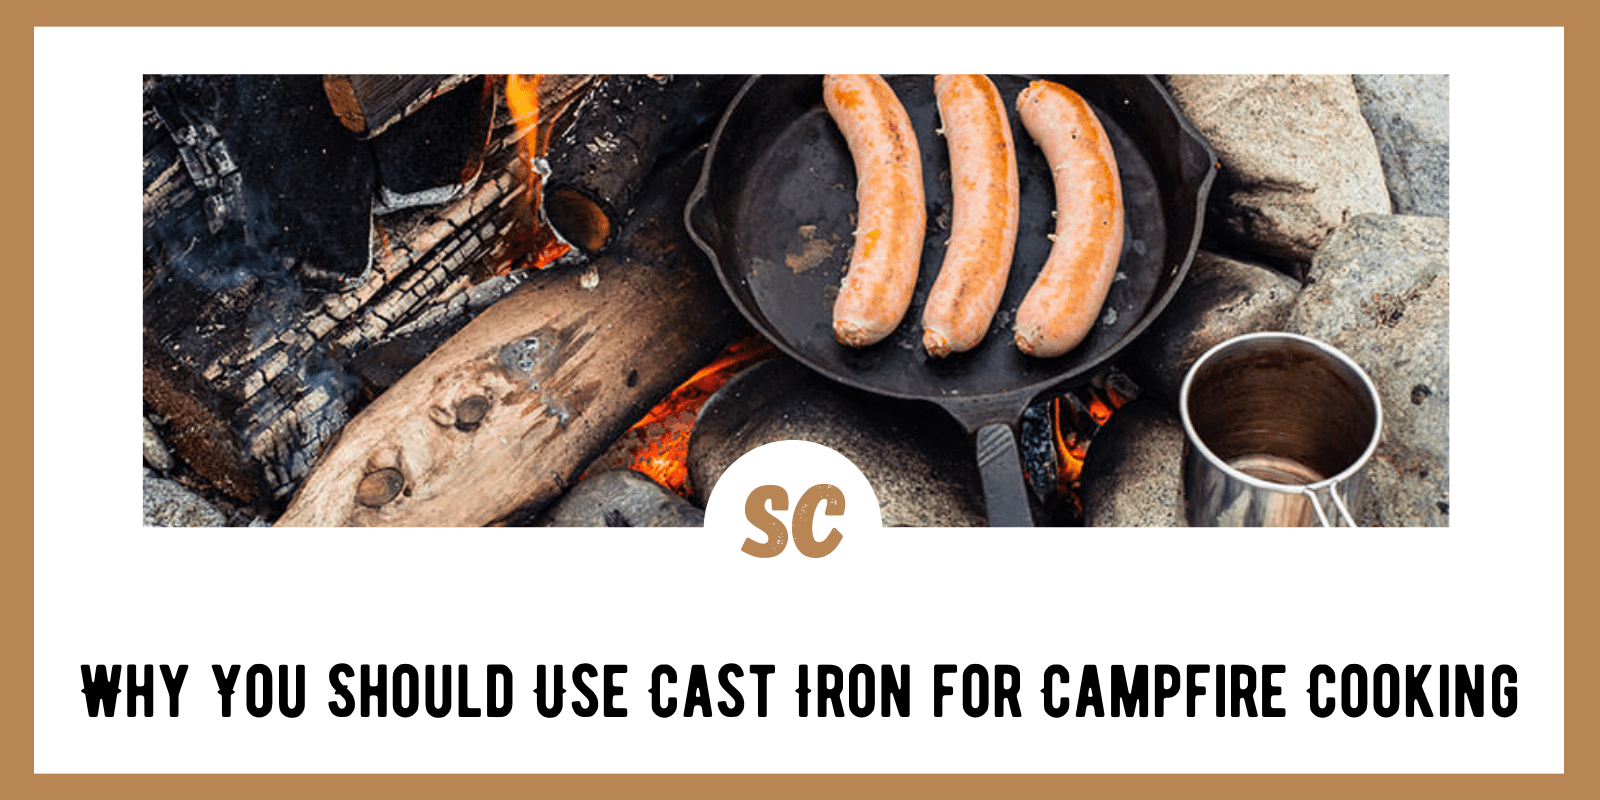 Why You Should Use Cast Iron for Campfire Cooking